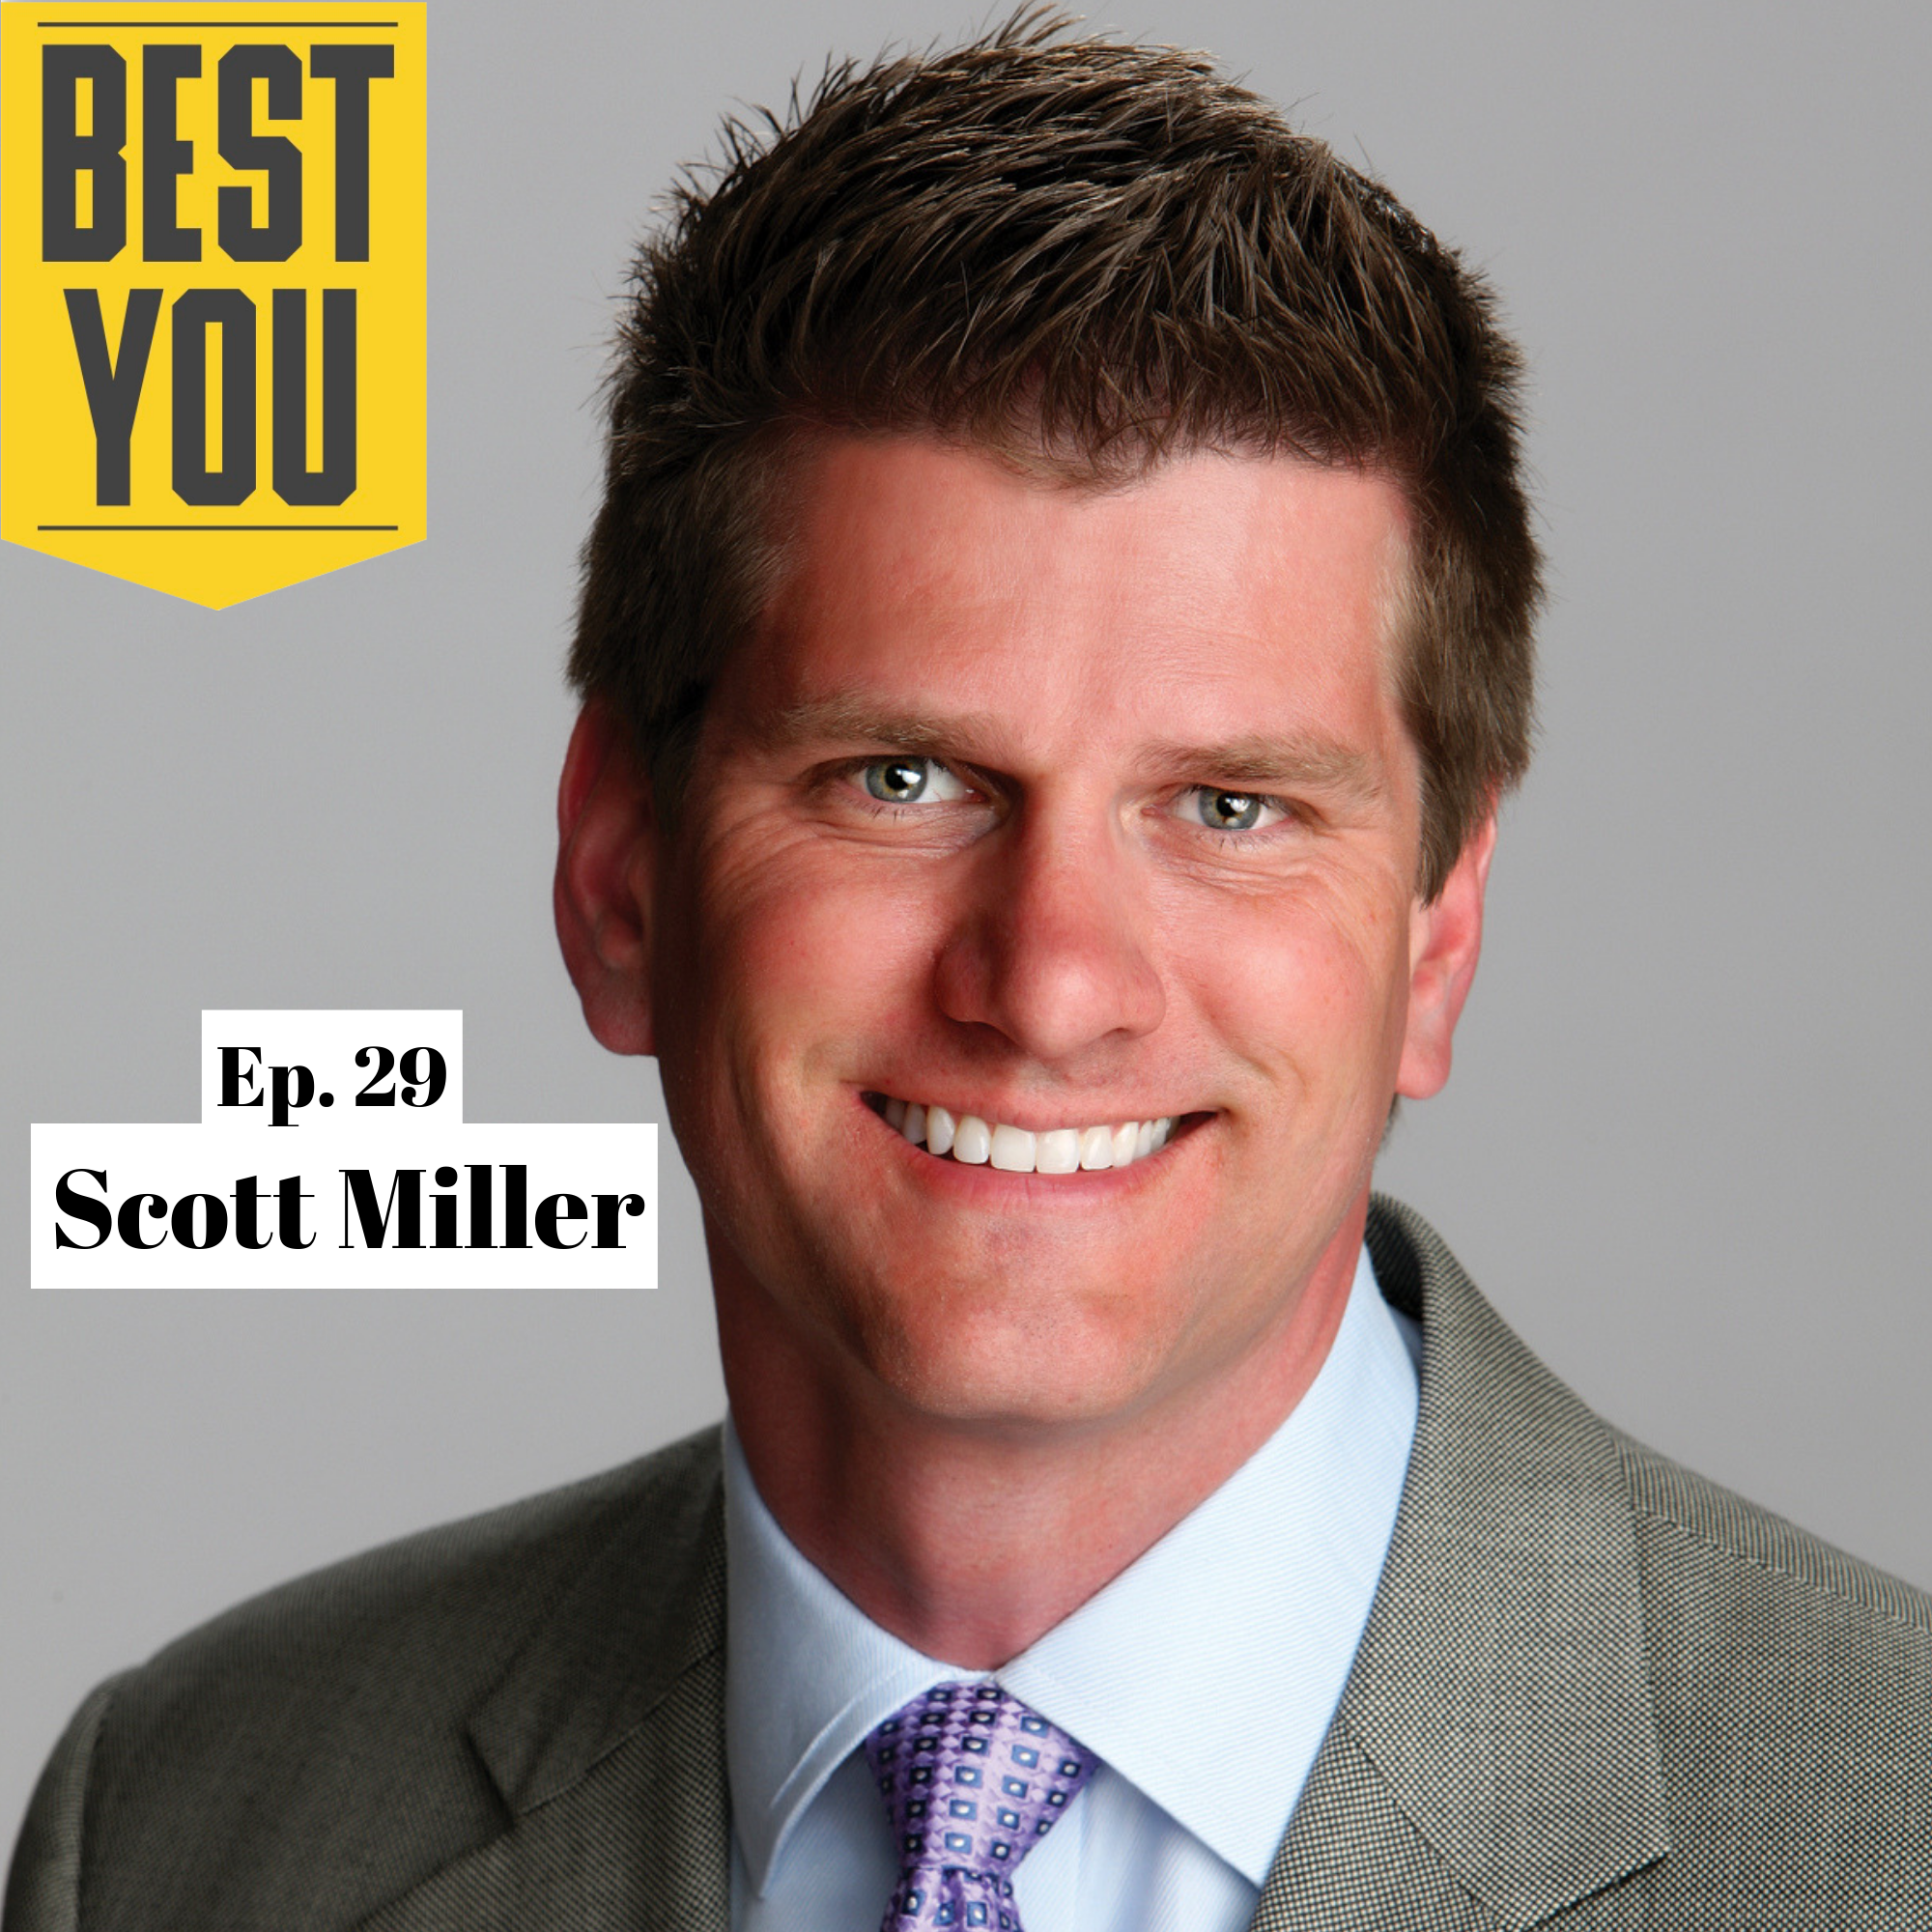 Ep. 57 Scott Miller - Become the Leader You'd Want to Follow